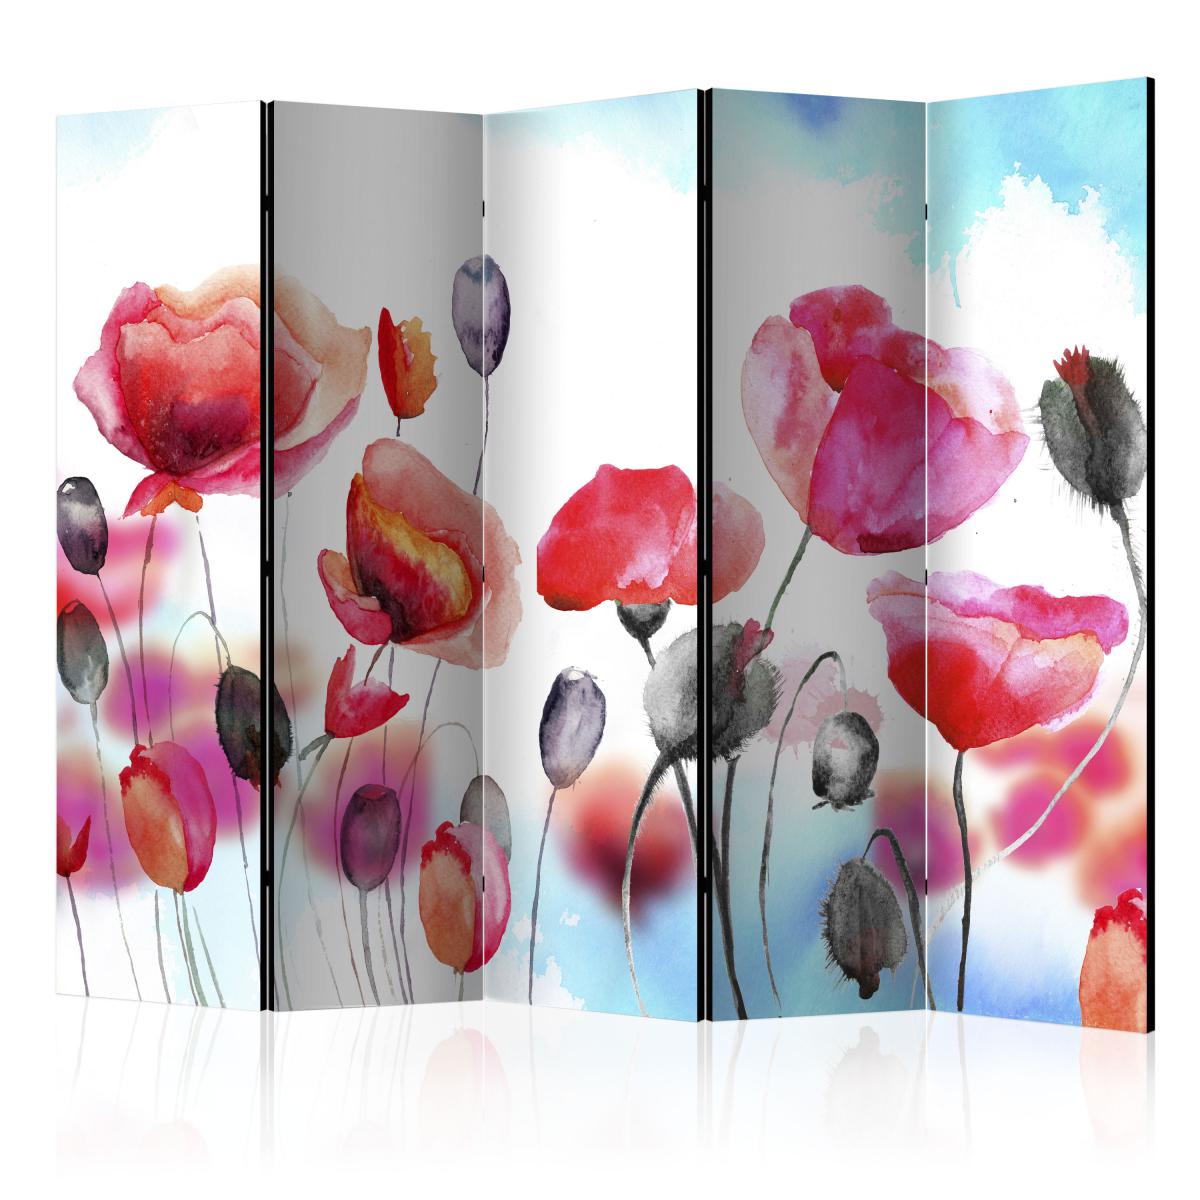 Bimago - Paravent 5 volets - Swaying with the Wind II [Room Dividers] - Décoration, image, art | 225x172 cm | XL - Grand Format | - Cloisons